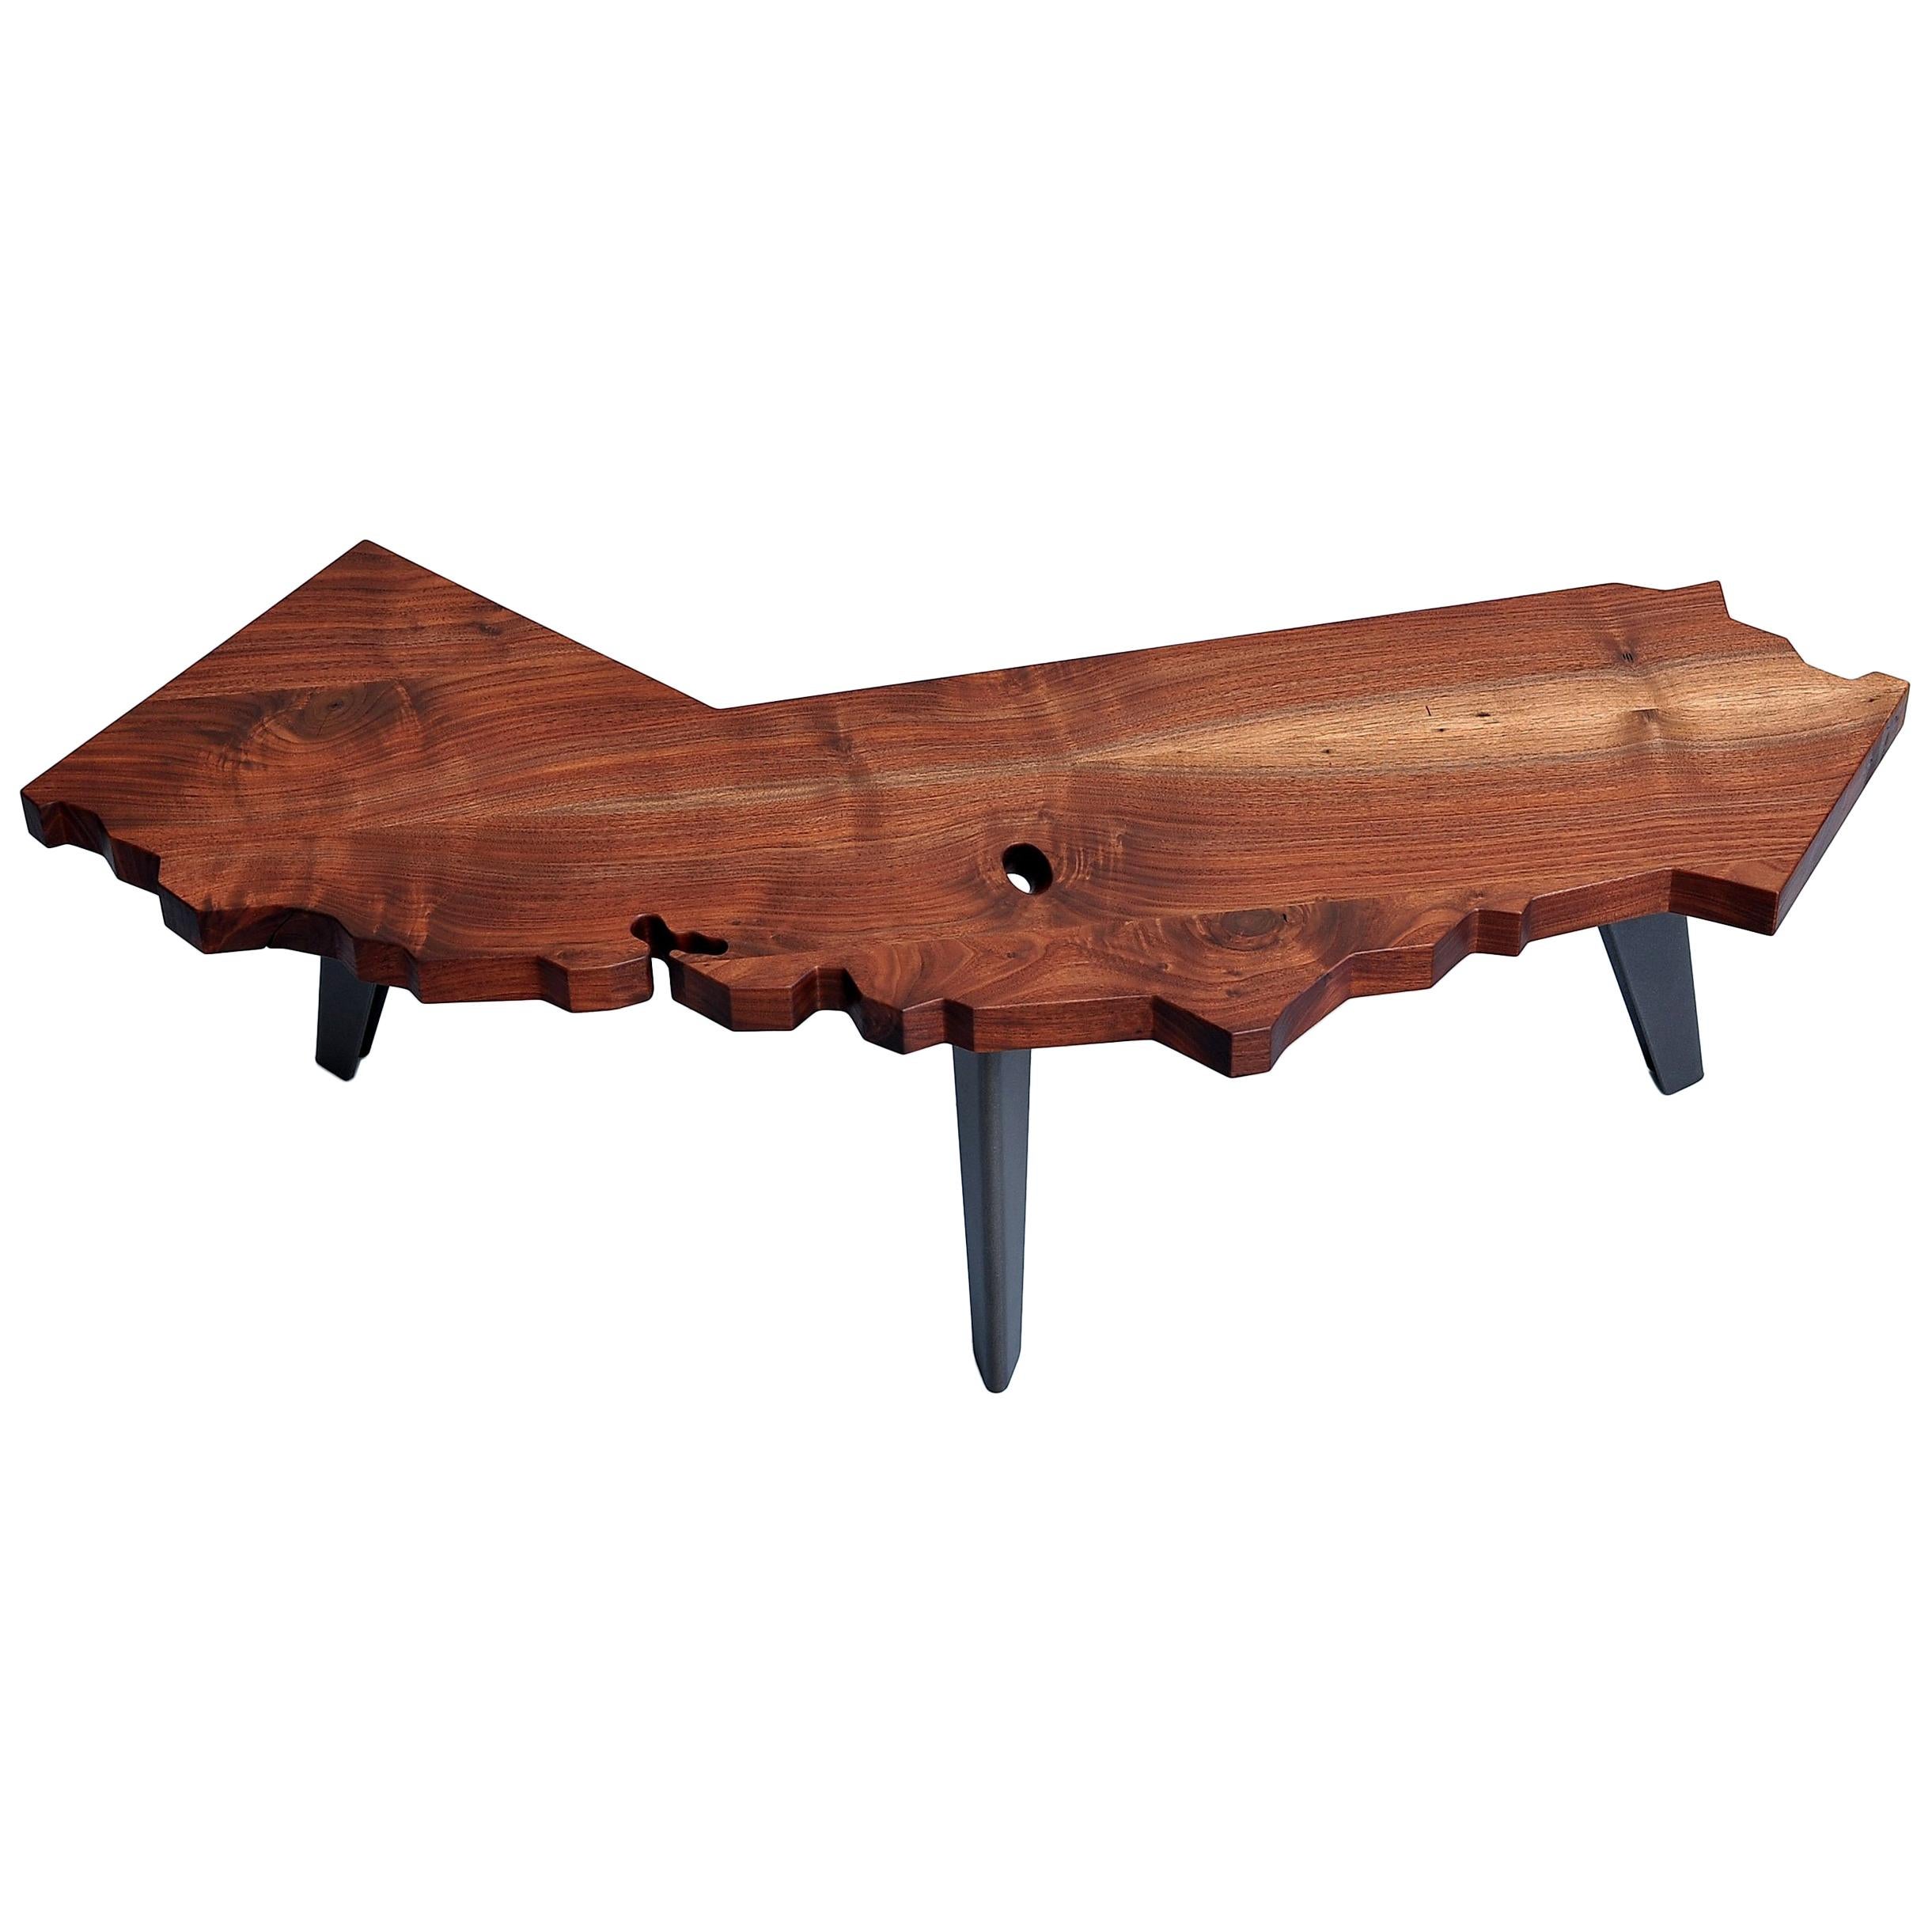 Small California Shaped Coffee Table Studio-crafted from Salvaged Claro Walnut For Sale